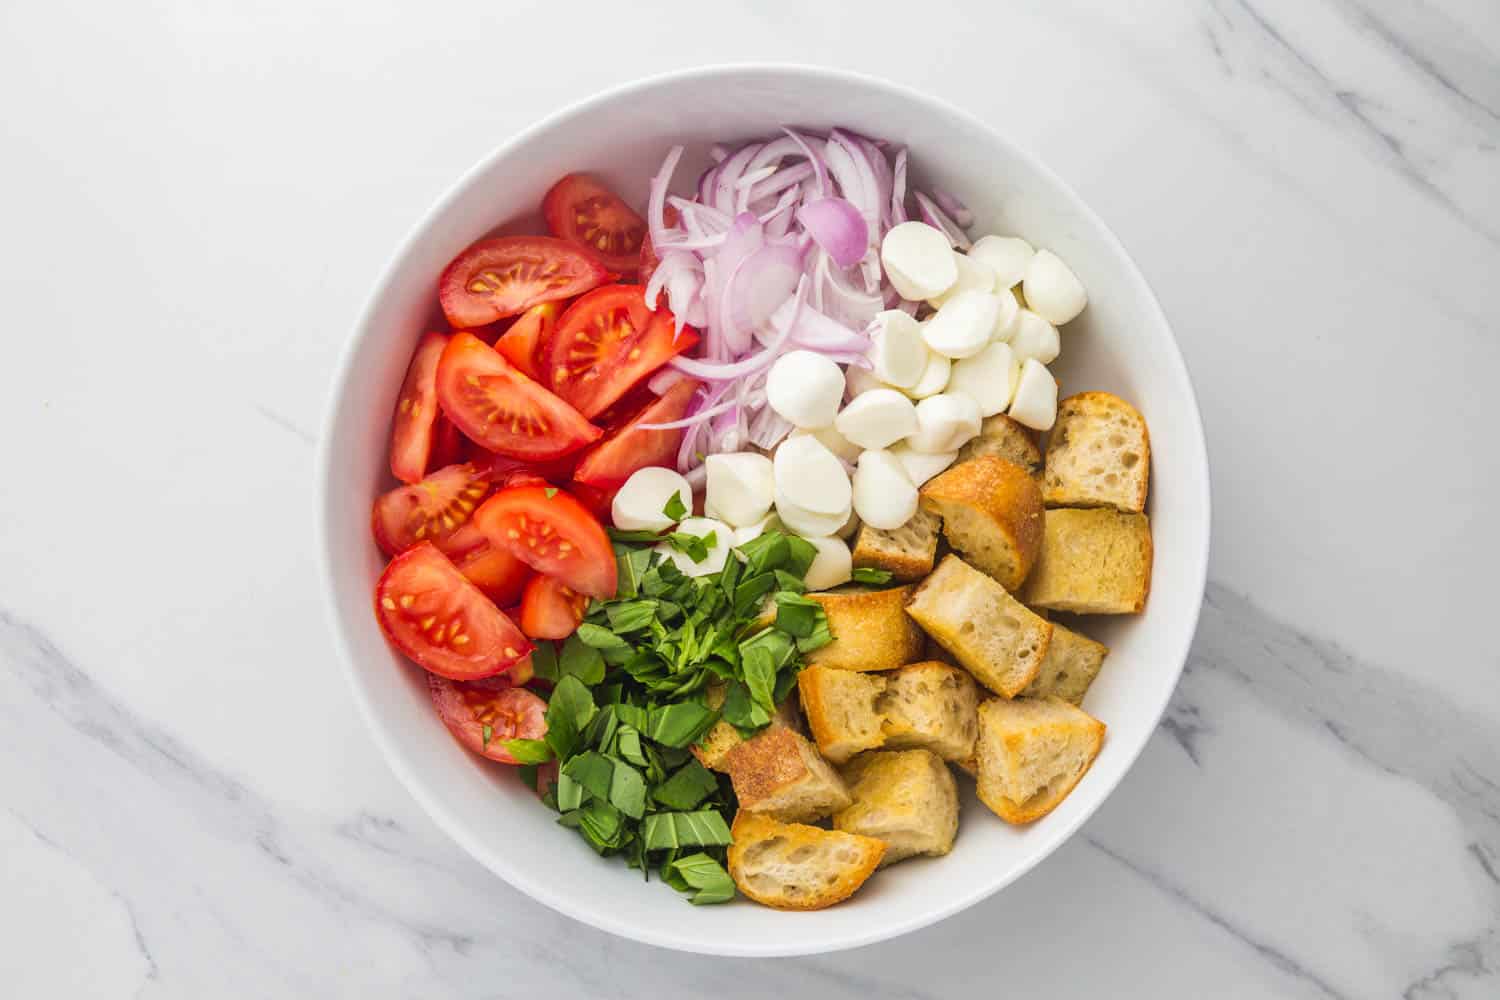 panzanella ingredients in a large bowl before being dressed and tossed.